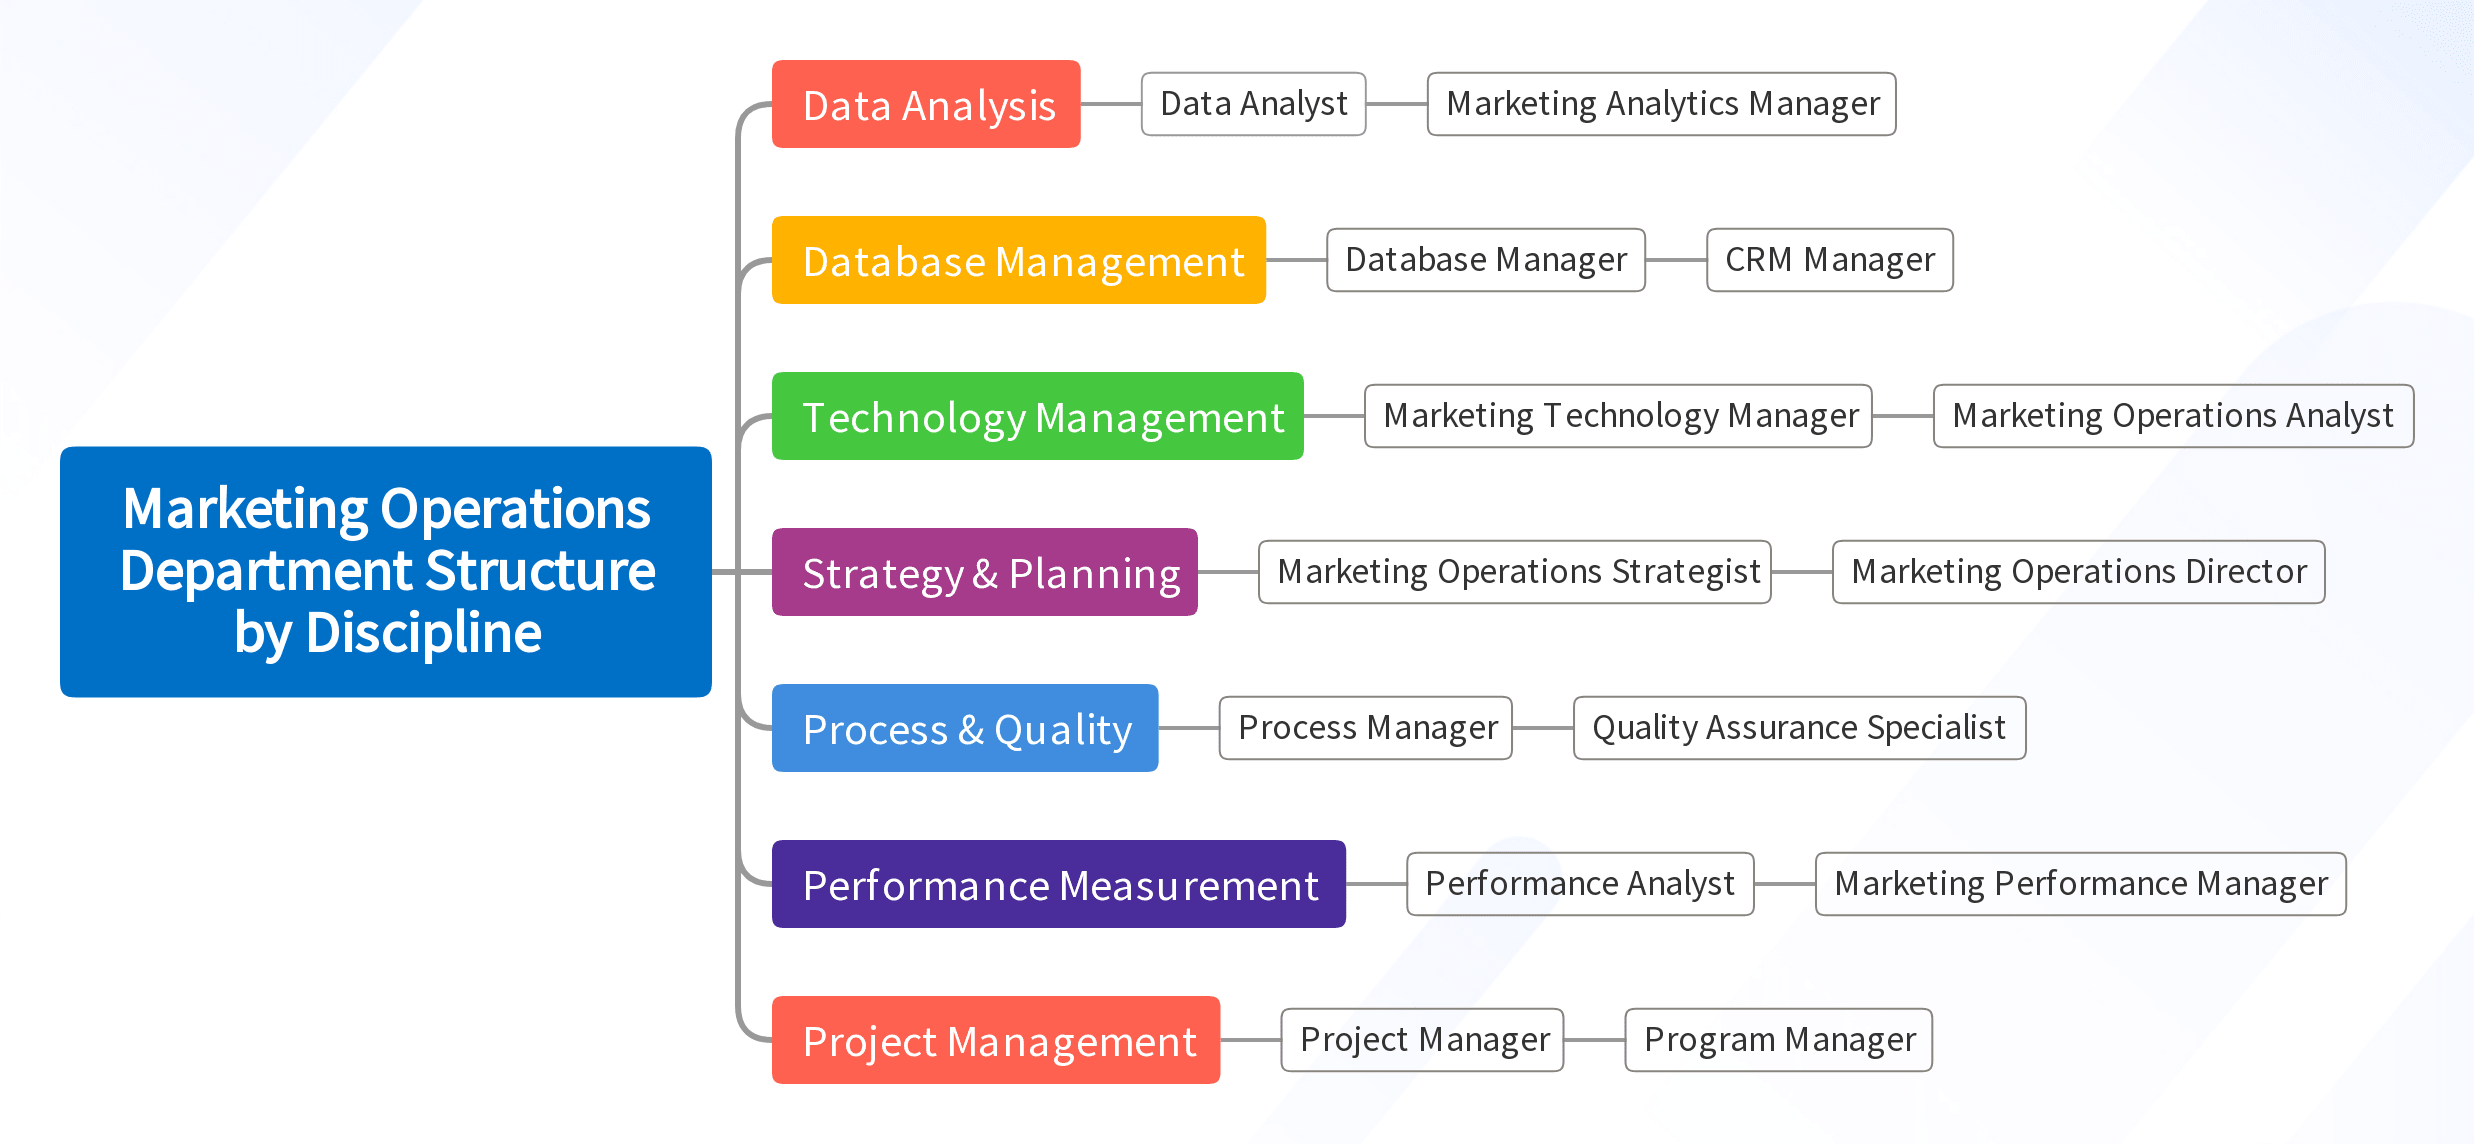 Marketing Operations Department Structure by Discipline